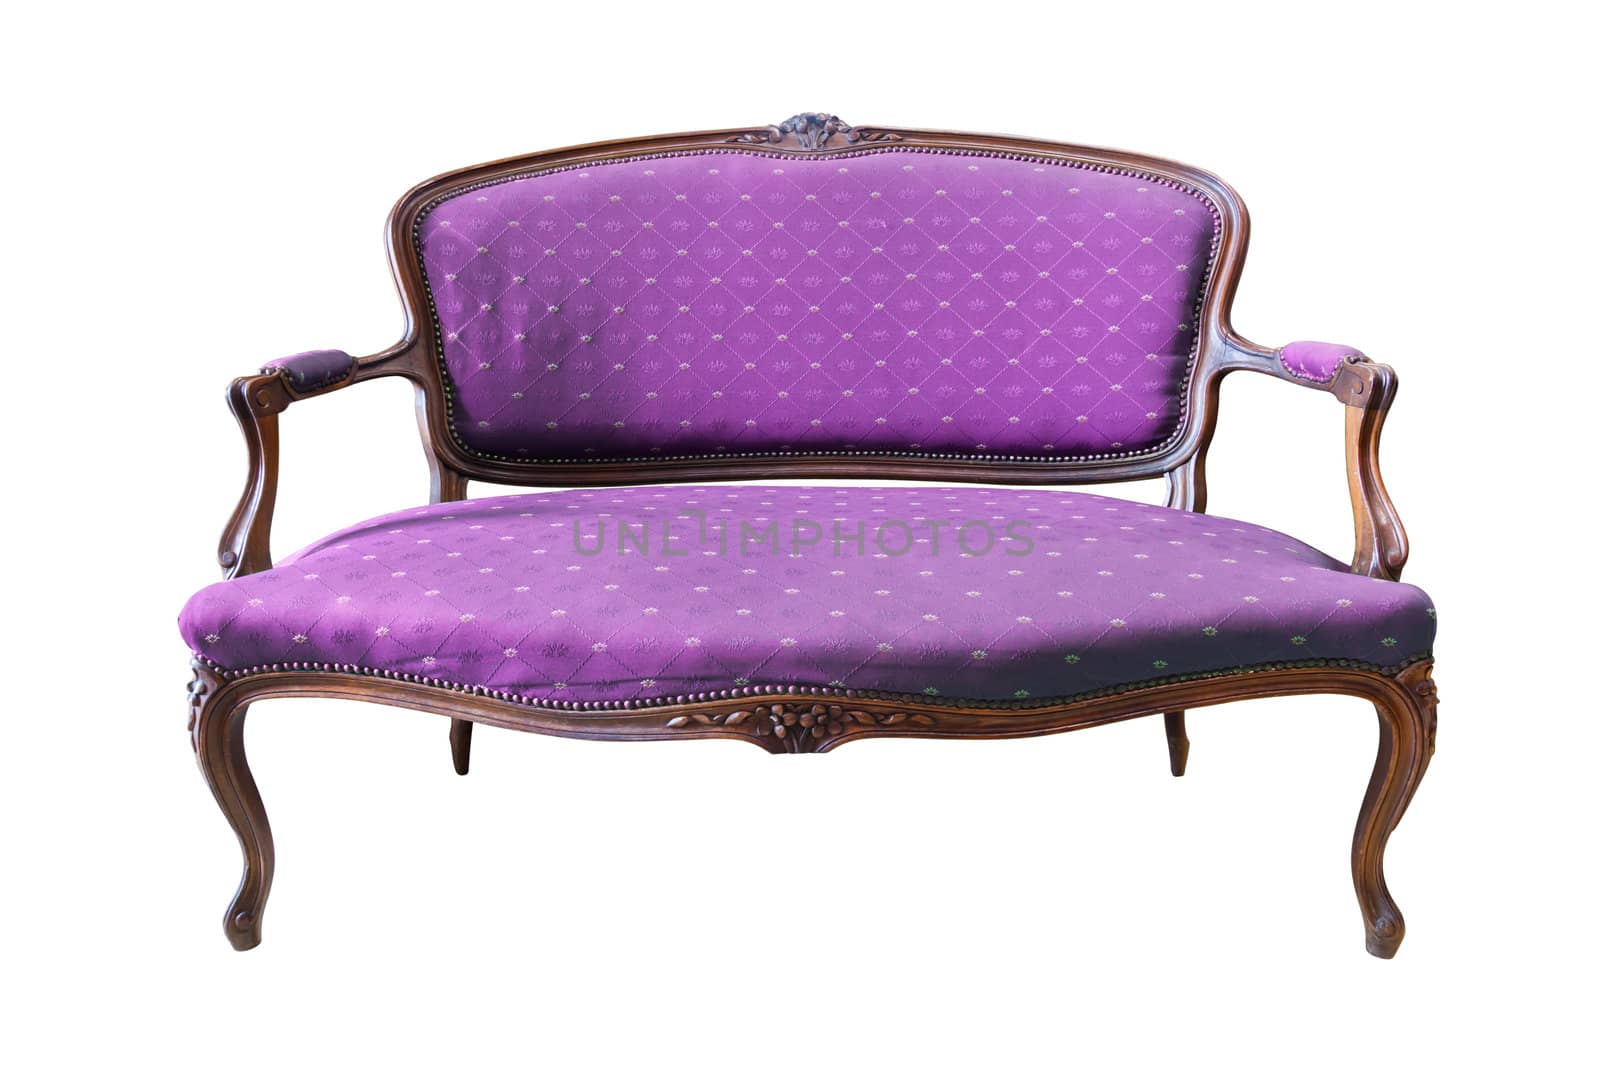 vintage purple luxury armchair isolated with clipping path